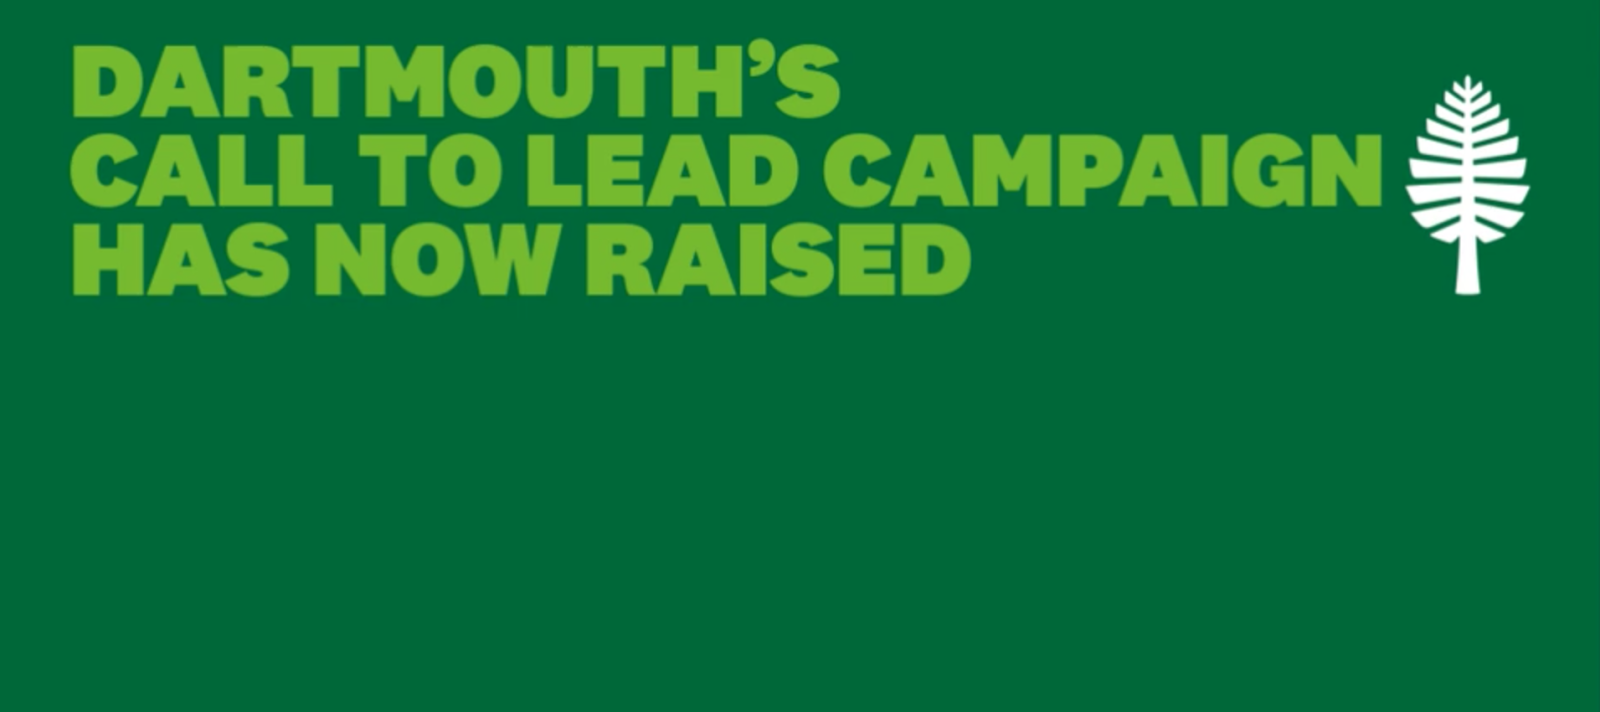 Dartmouth's Call to Lead Campaign Has now Raised